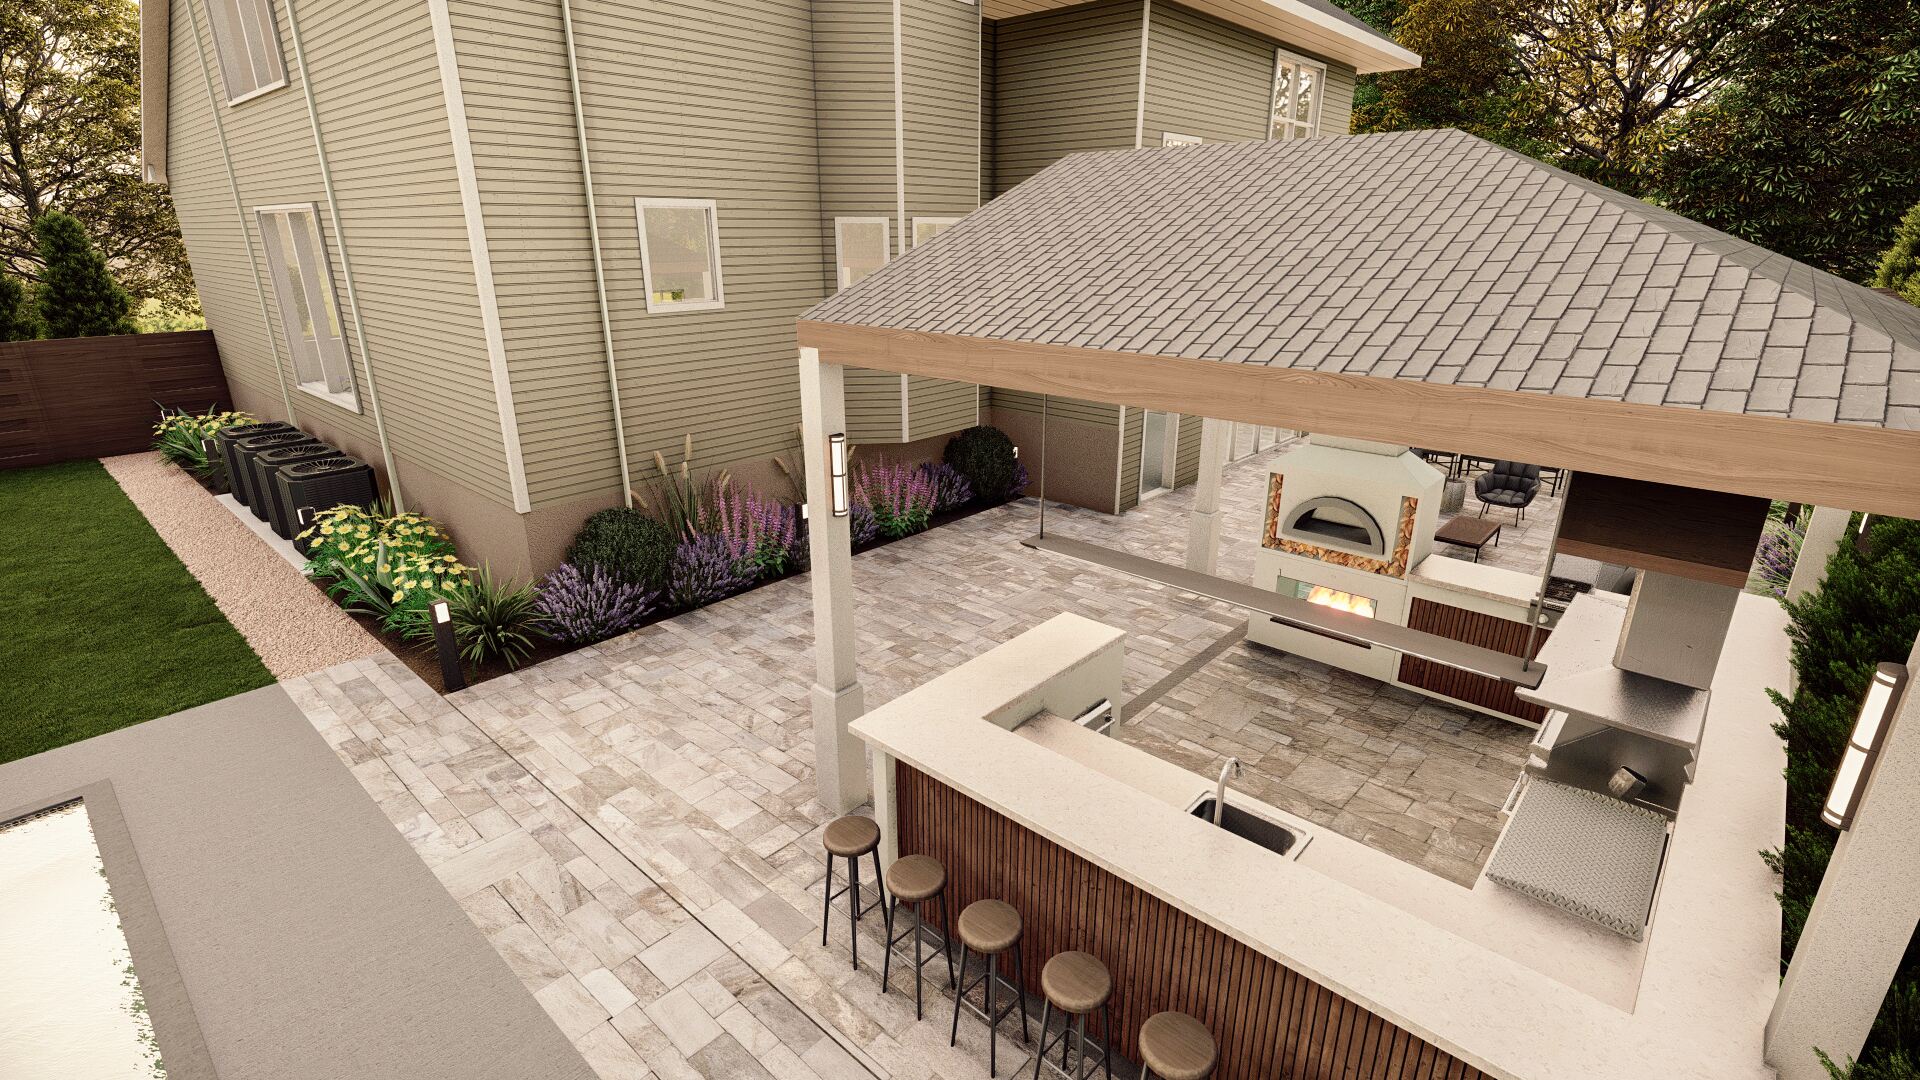 An elegant outdoor kitchen and dining area with a built-in pizza oven and grill, bar seating, and a cozy lounge space, all under a covered patio adjacent to a modern home, surrounded by lush flowering plants.